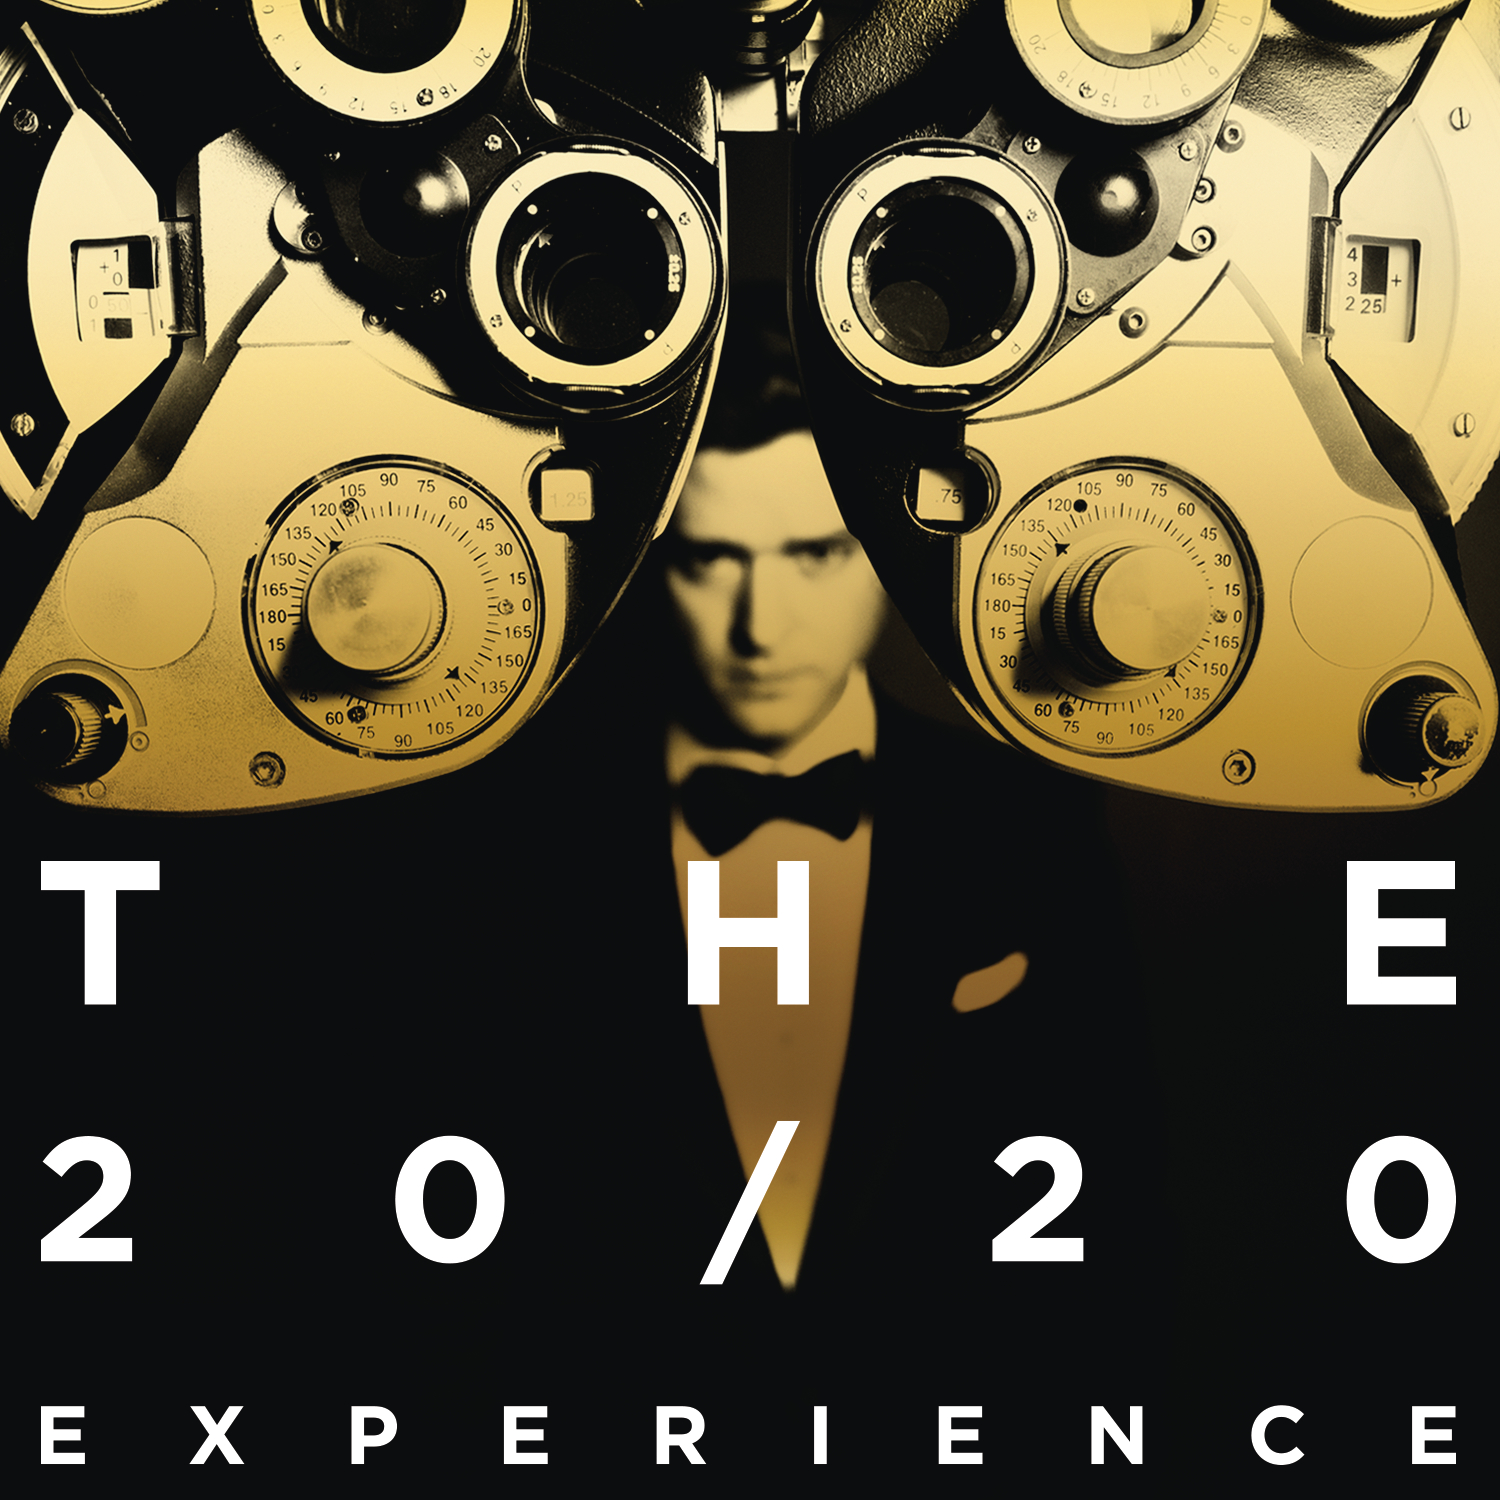 Justin Timberlake – The 20/20 Experience – 2 of 2 (Deluxe)
Released: September 27, 2013
Label: RCA Records
